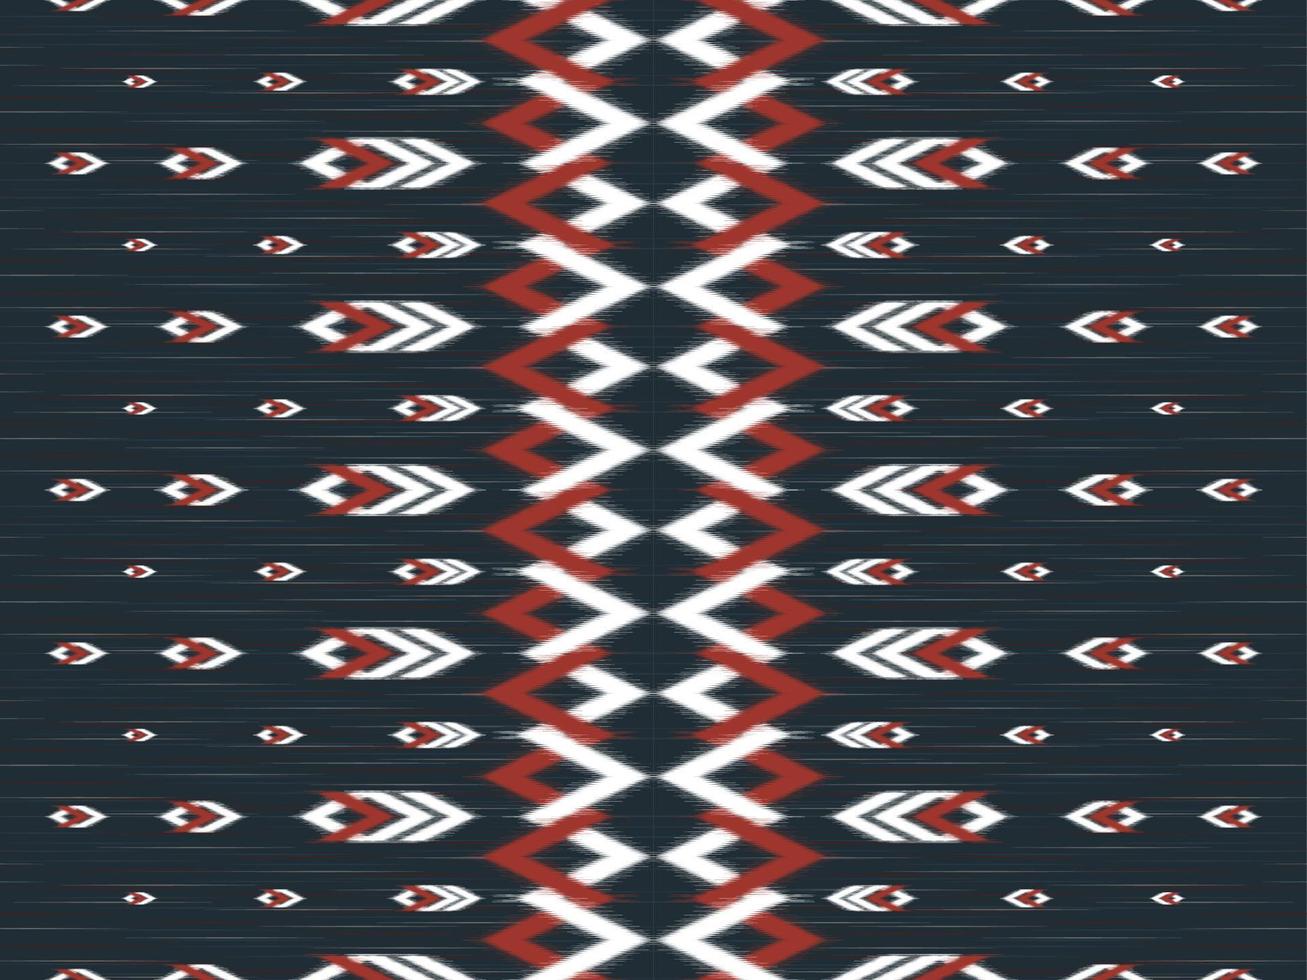 Beautiful ikat ethnic pattern art. Seamless pattern in tribal, folk embroidery, and Mexican style. Geometric striped. Design for background, wallpaper, vector illustration, fabric, clothing, carpet.